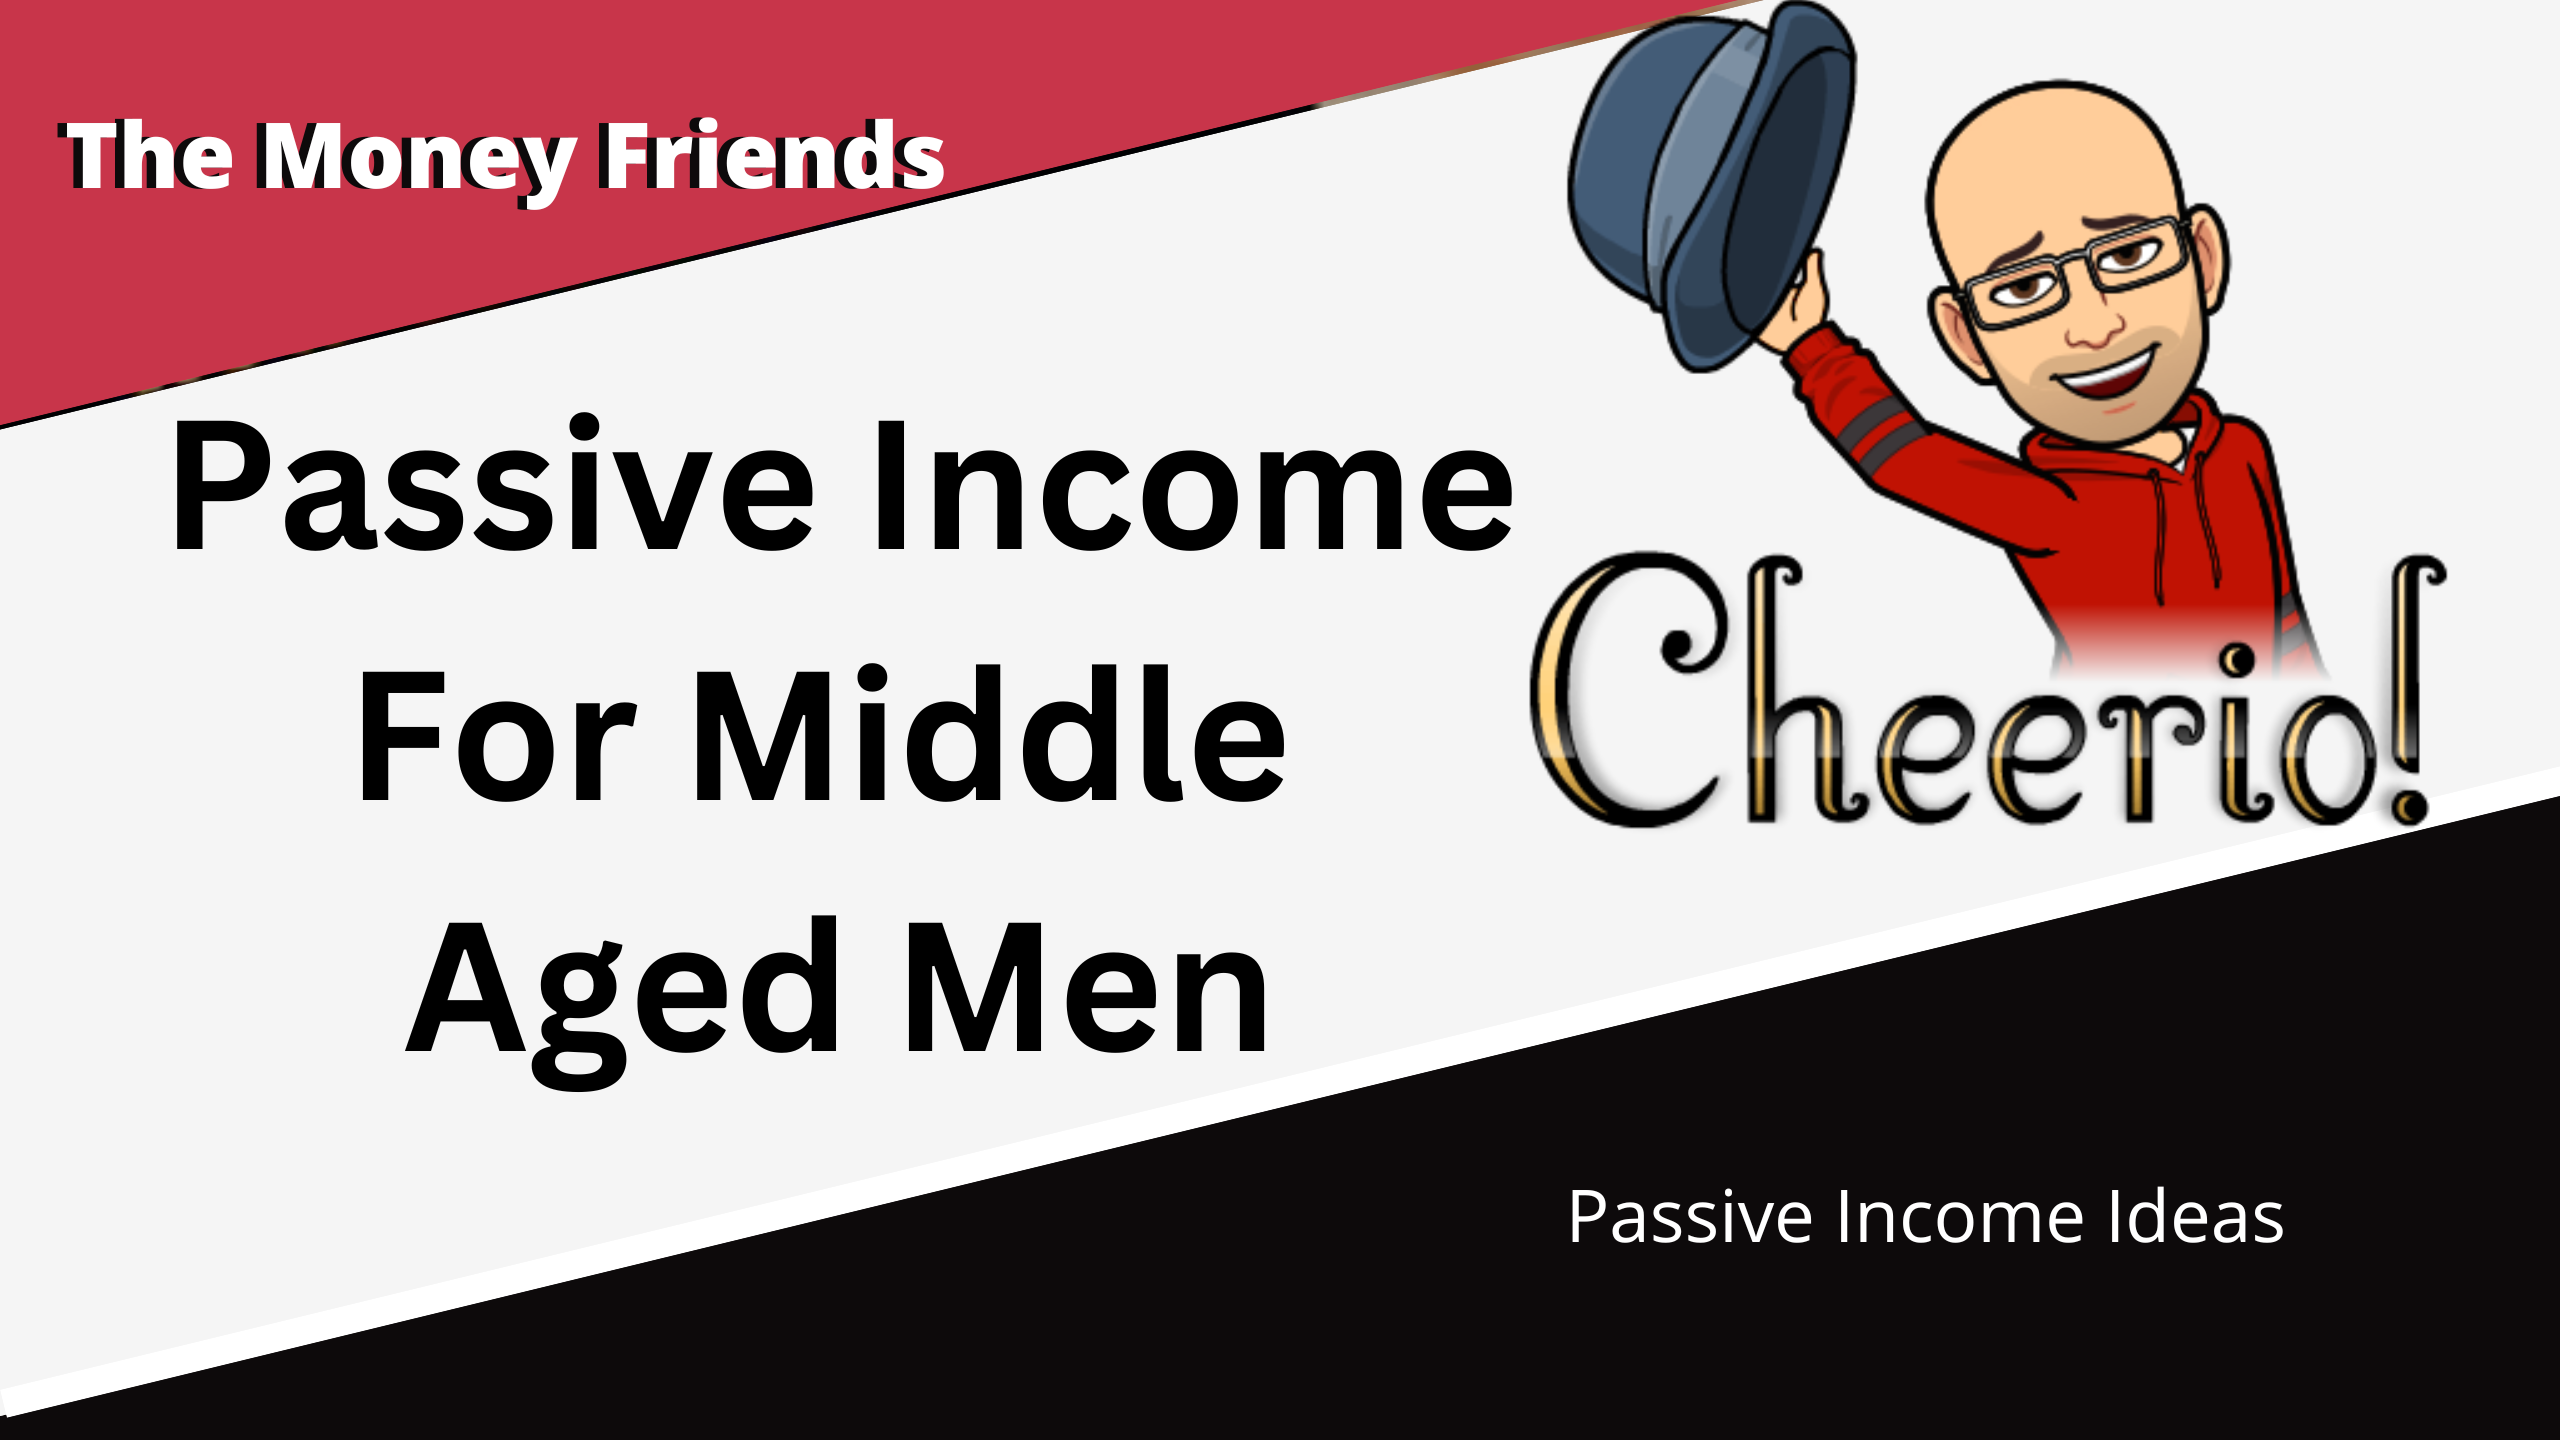 Passive Income Ideas For Middle Aged Men